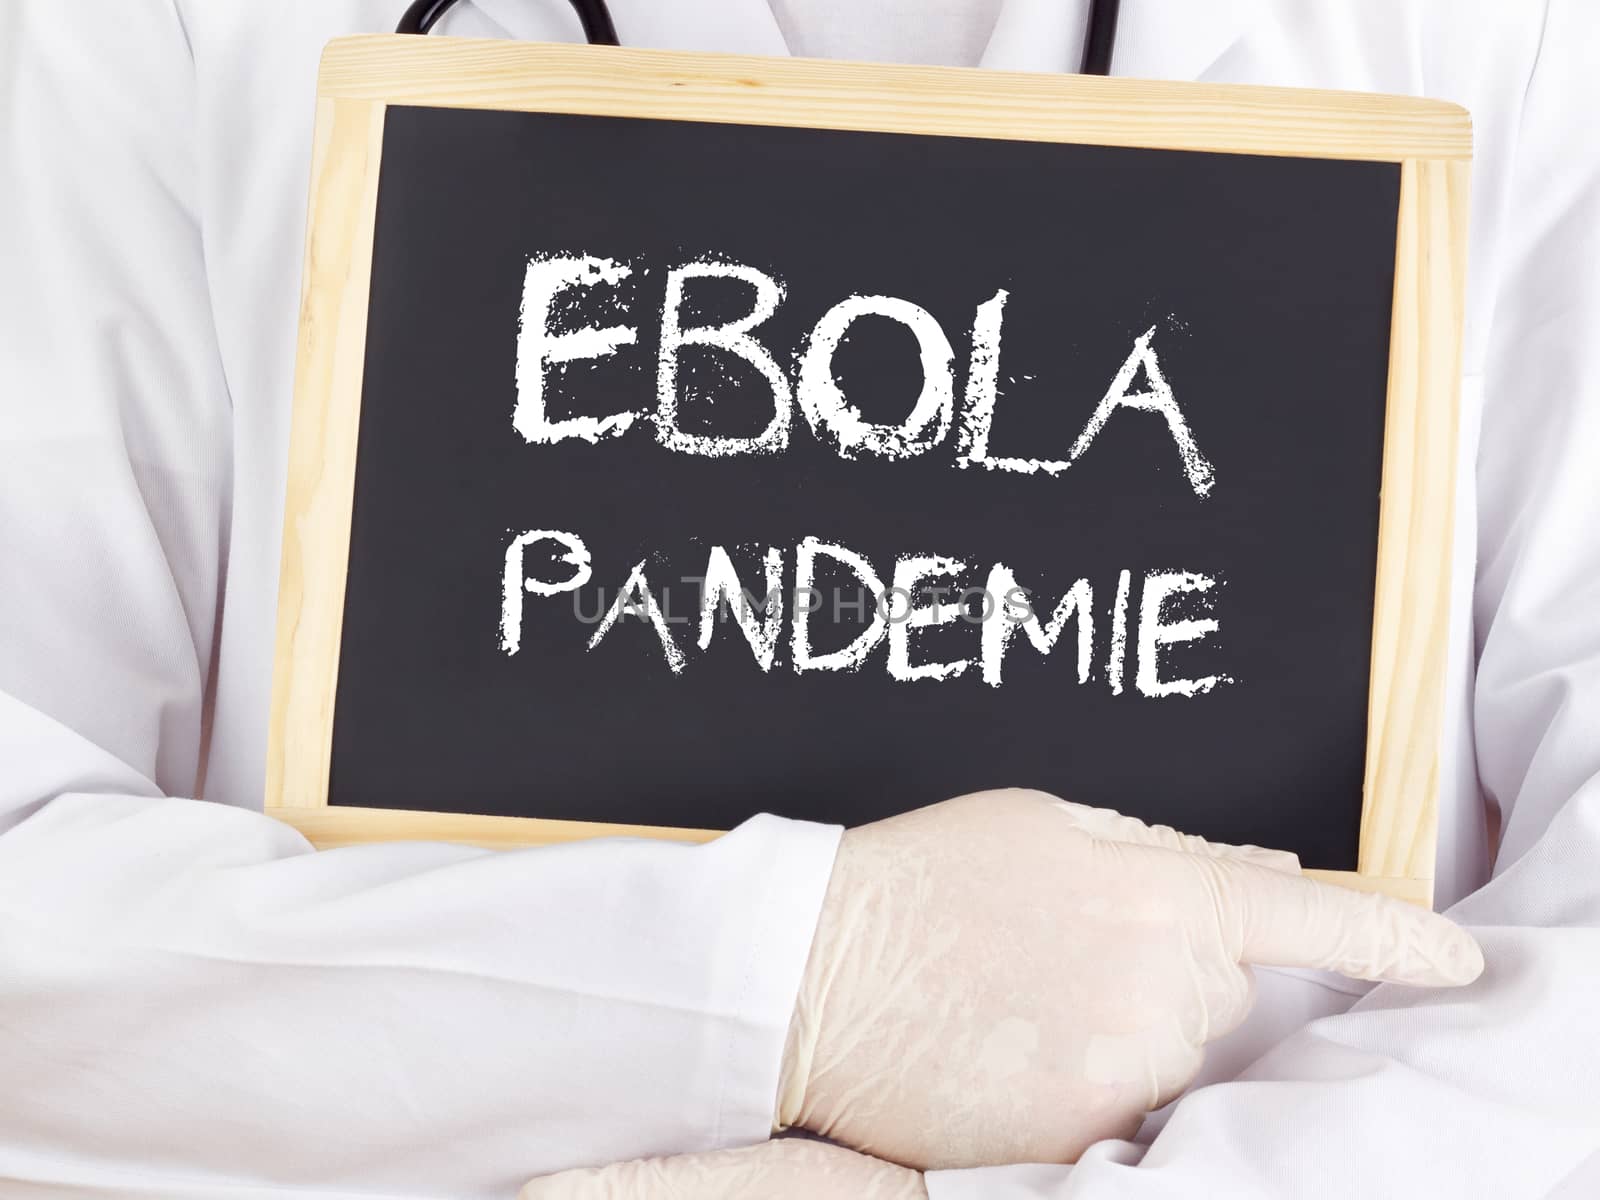 Doctor shows information: Ebola pandemia in german by gwolters